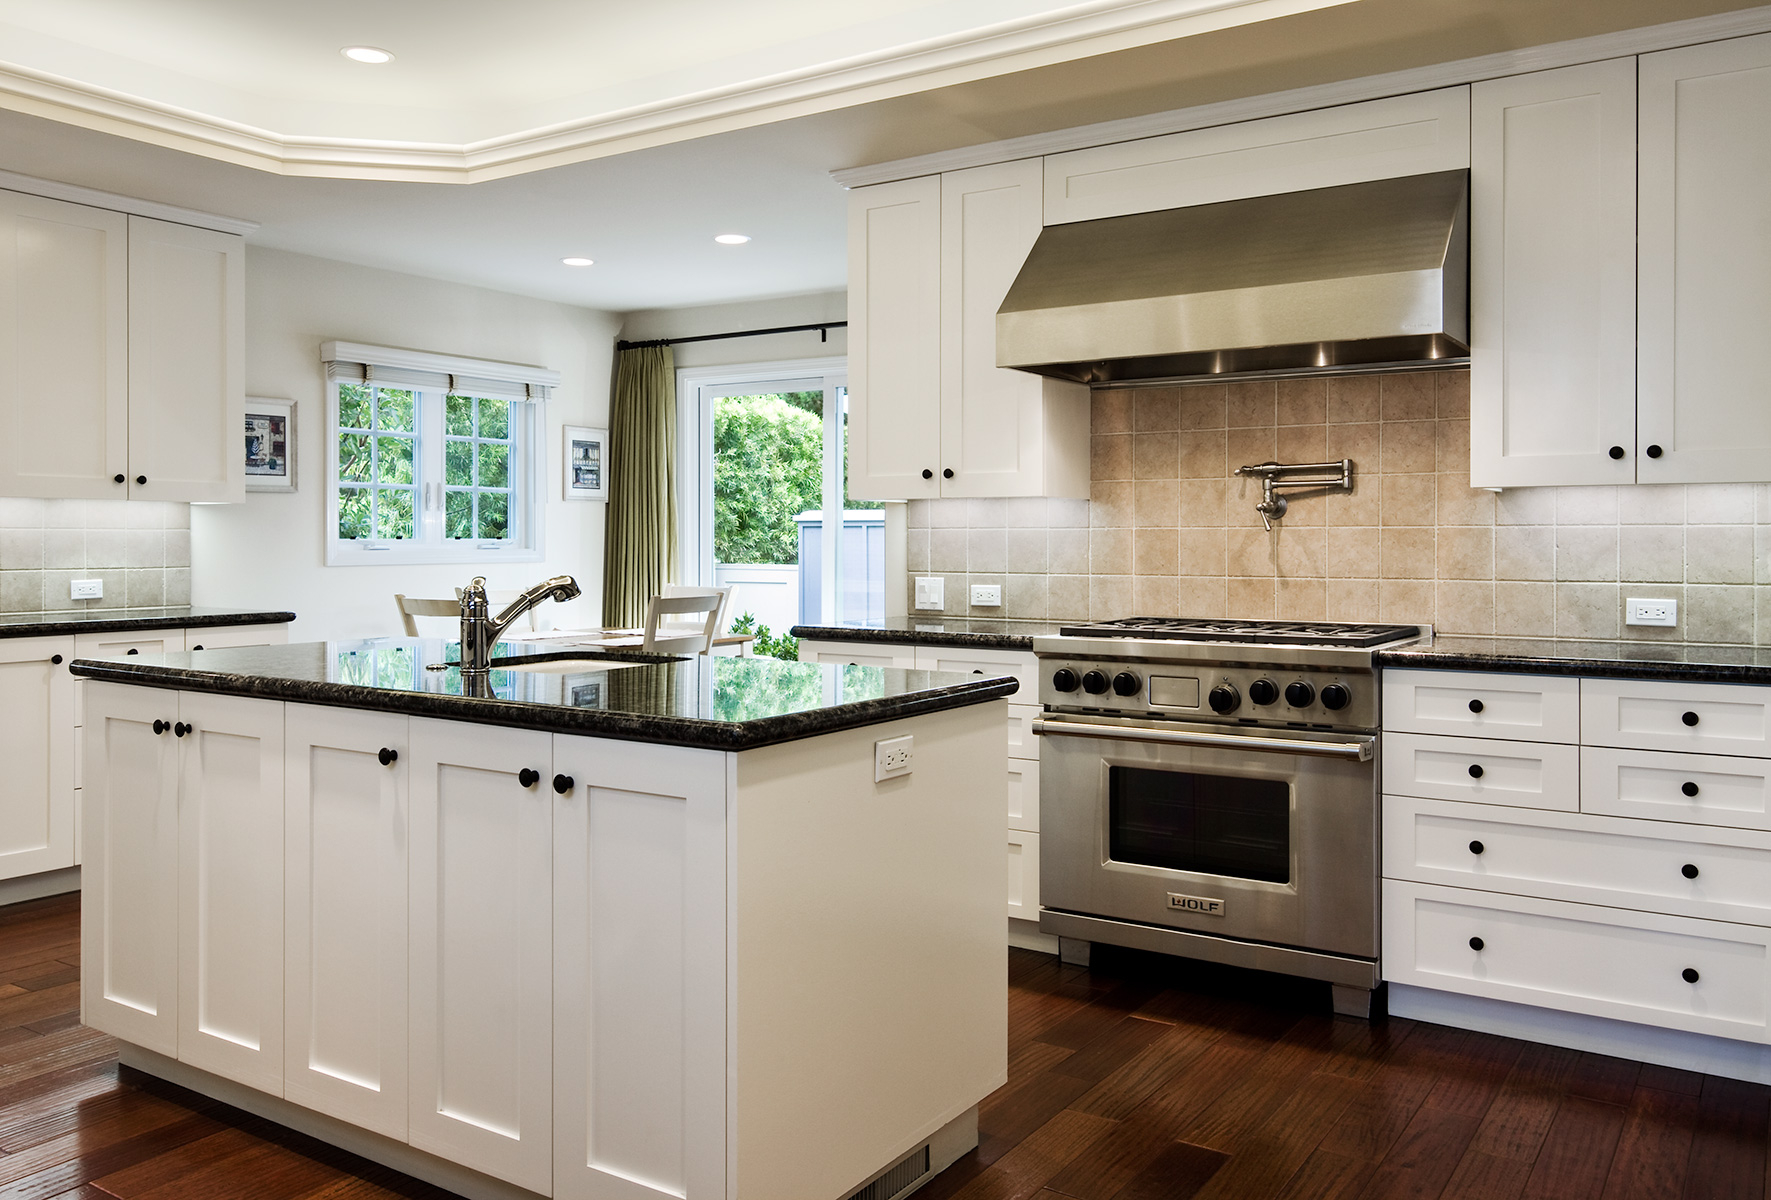 traditional kitchen with wood floors and white cabinets and dark marble countertops